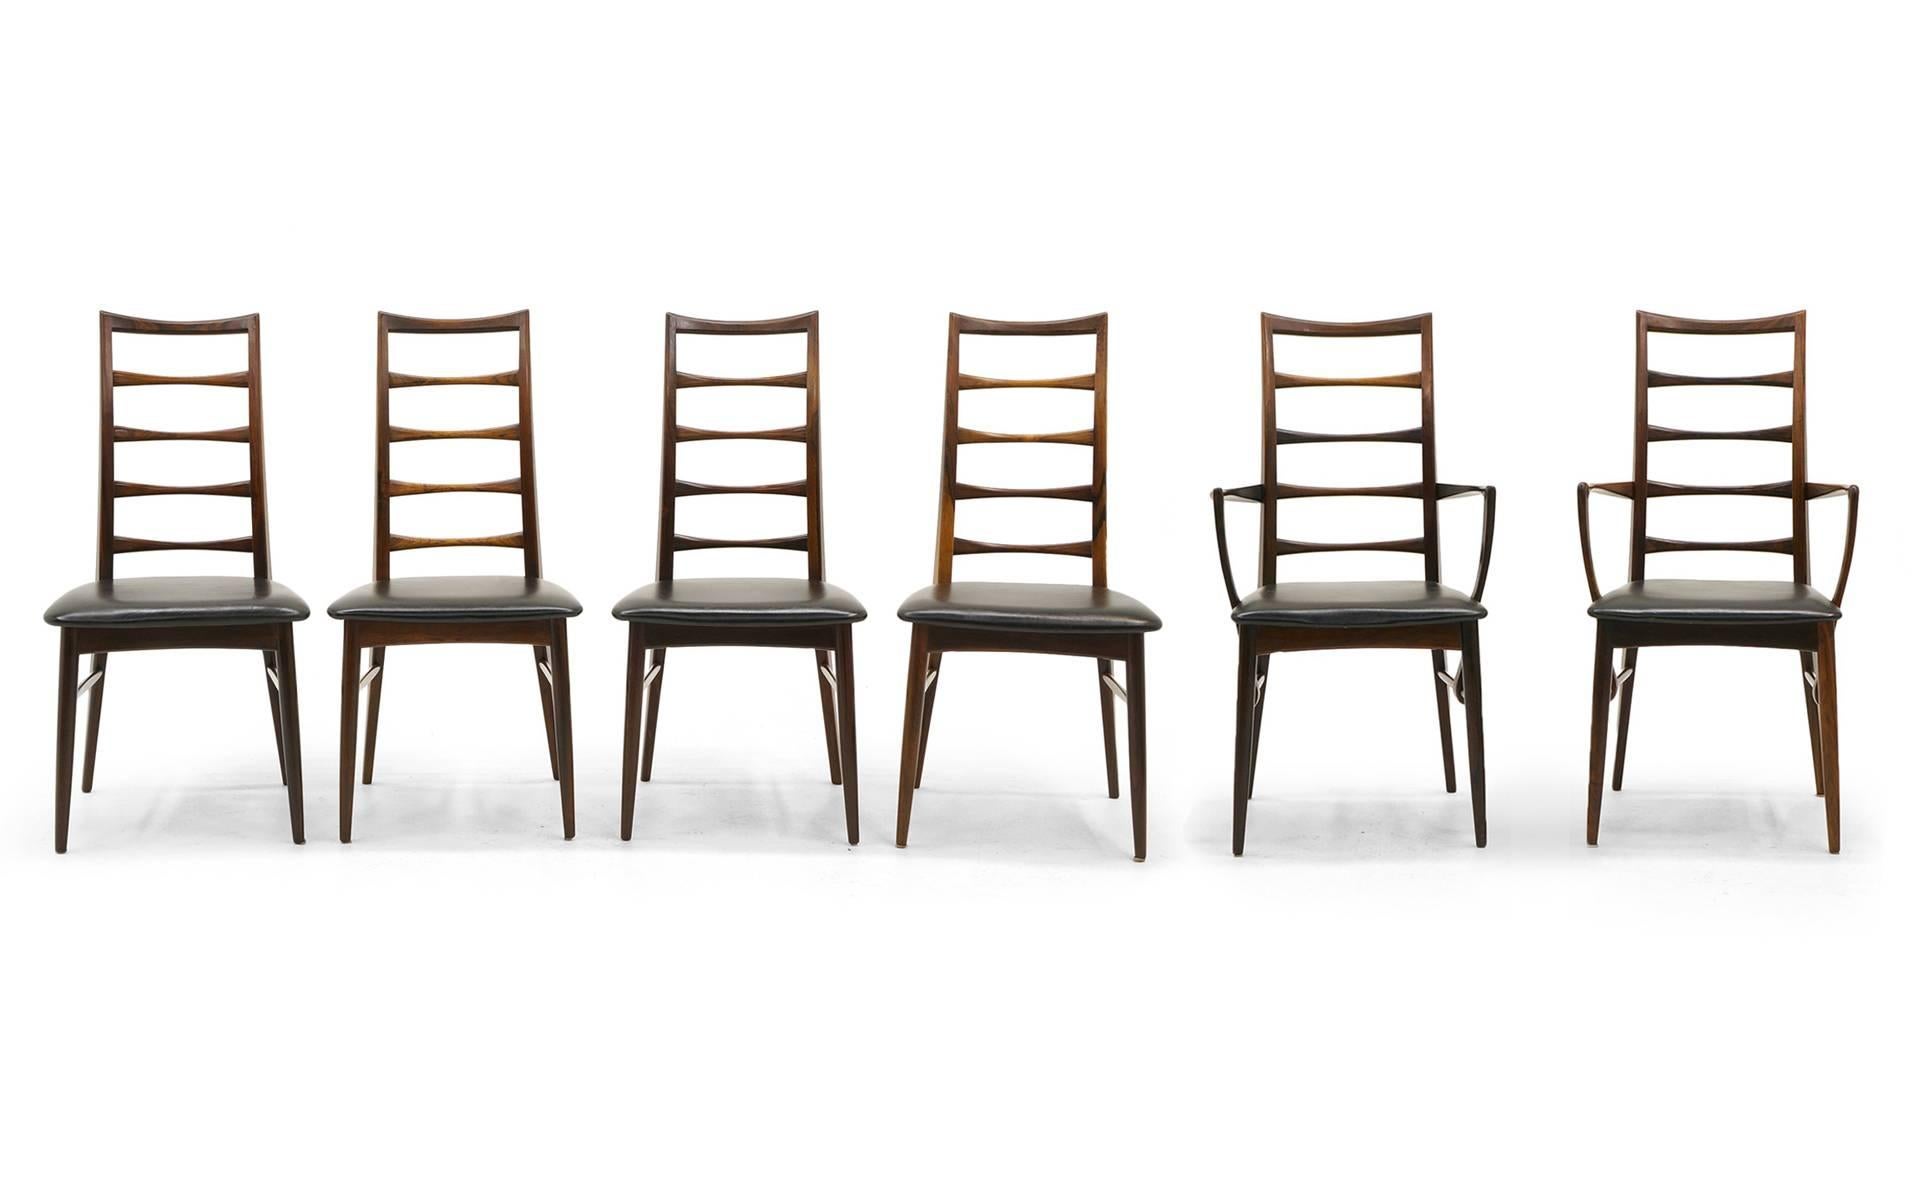 Set of 6 dining chairs in Brazilian rosewood designed by Niels Kofoed. Two armchairs and six armless chairs. Excellent examples of this Danish modern design. Rare set of 6, all rosewood.
Armchair dimensions
37.5 in H x 17 in D x 21.5 in W
17.5 in.